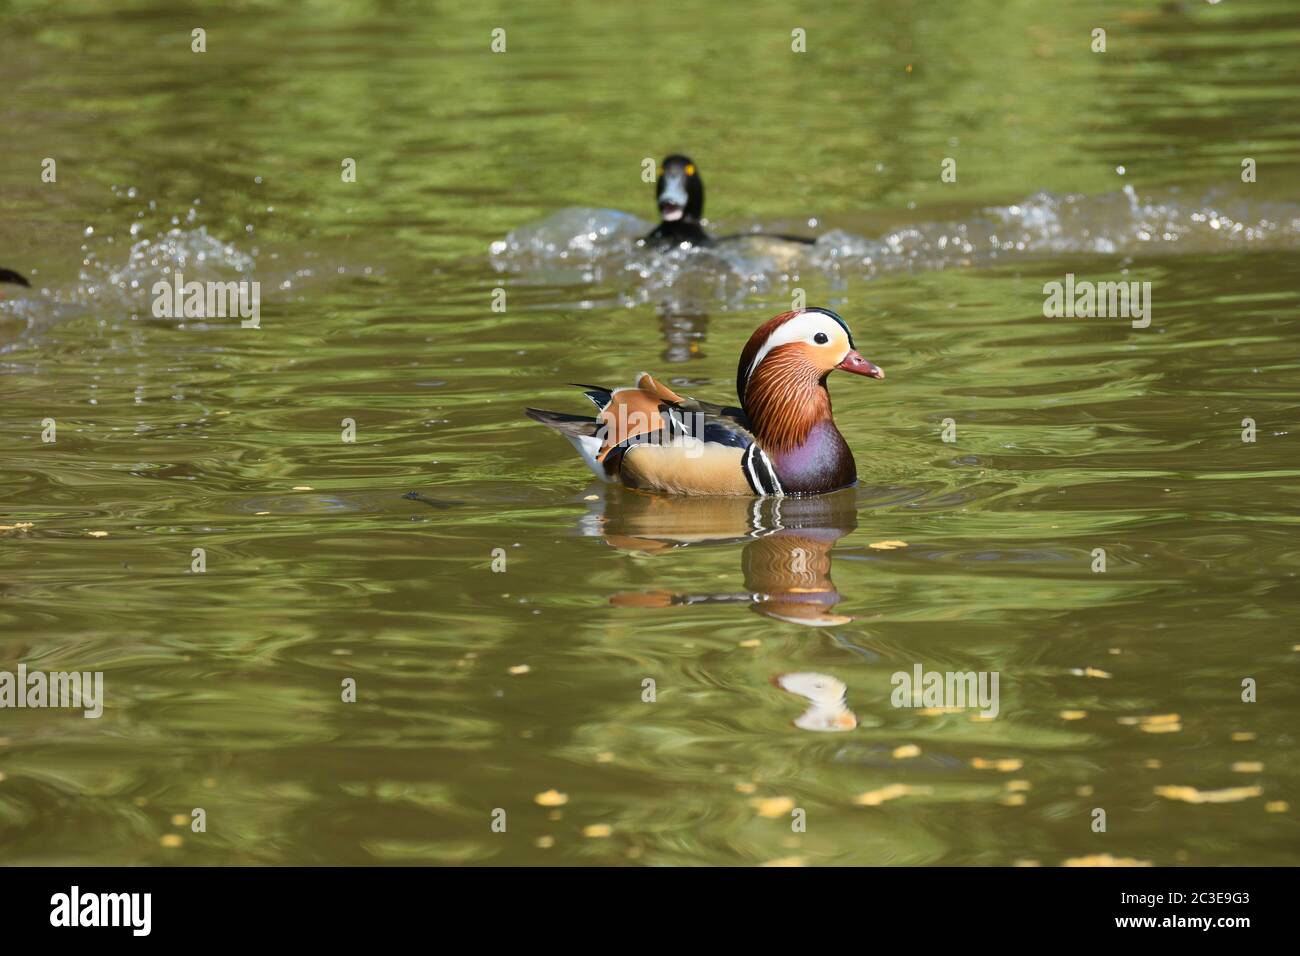 A Mandarin Duck Swims Peacefully While a Tufted Duck Chases Another Duck Behind It Stock Photo